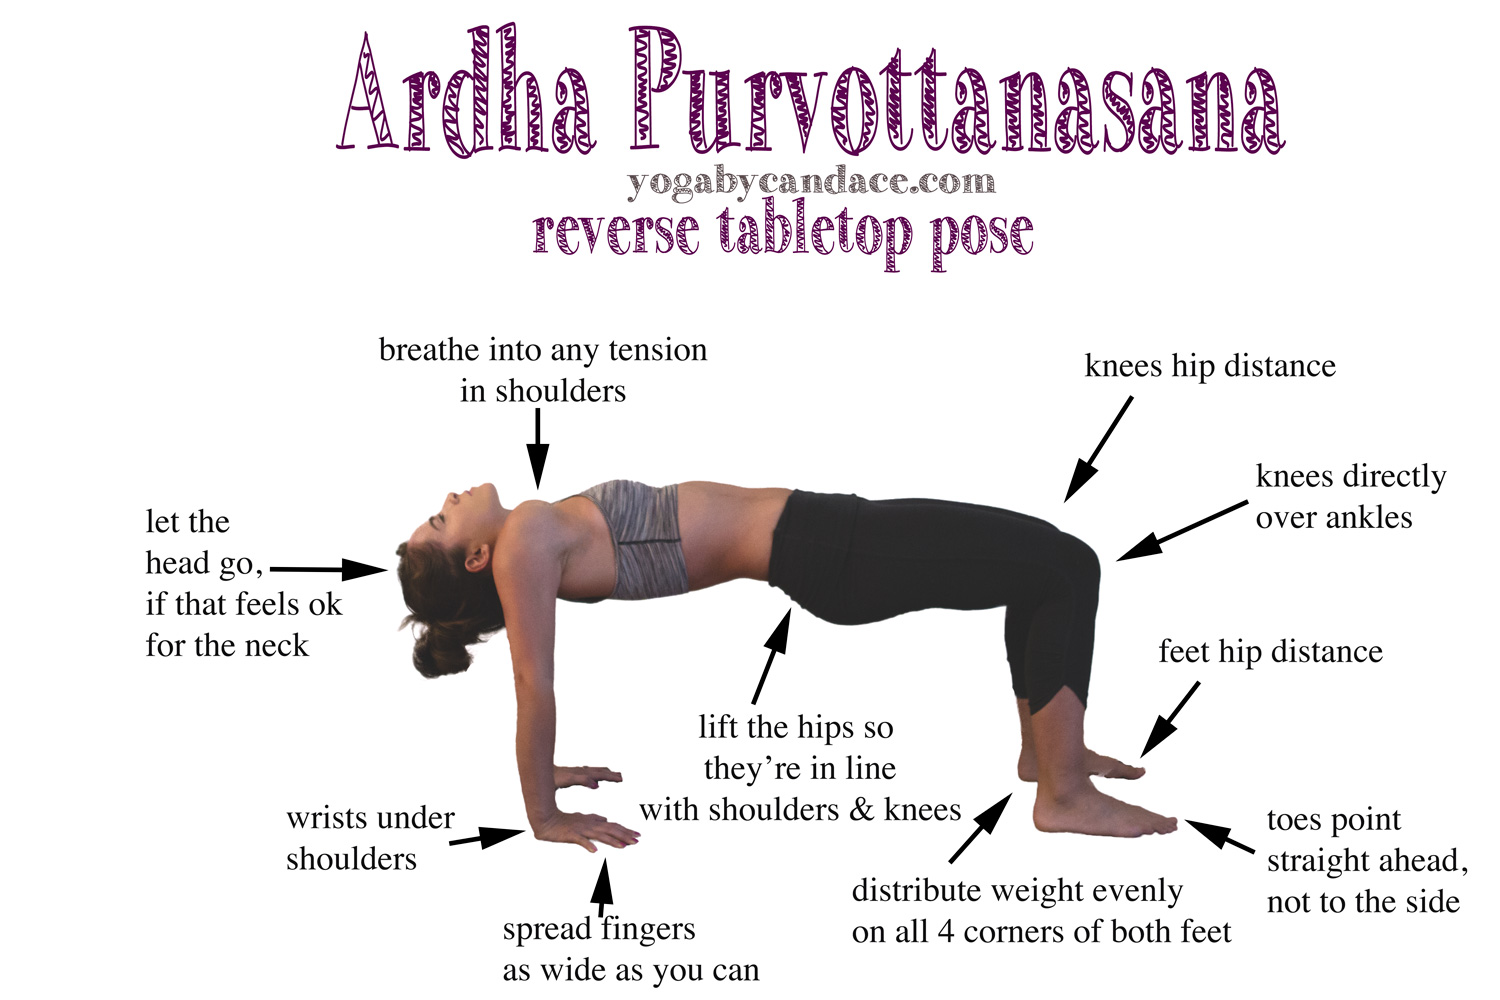 Credits to this image go to https://www.yogabycandace.com/blog/how-to-do-reverse-tabletop-pose?rq=tabletop. 